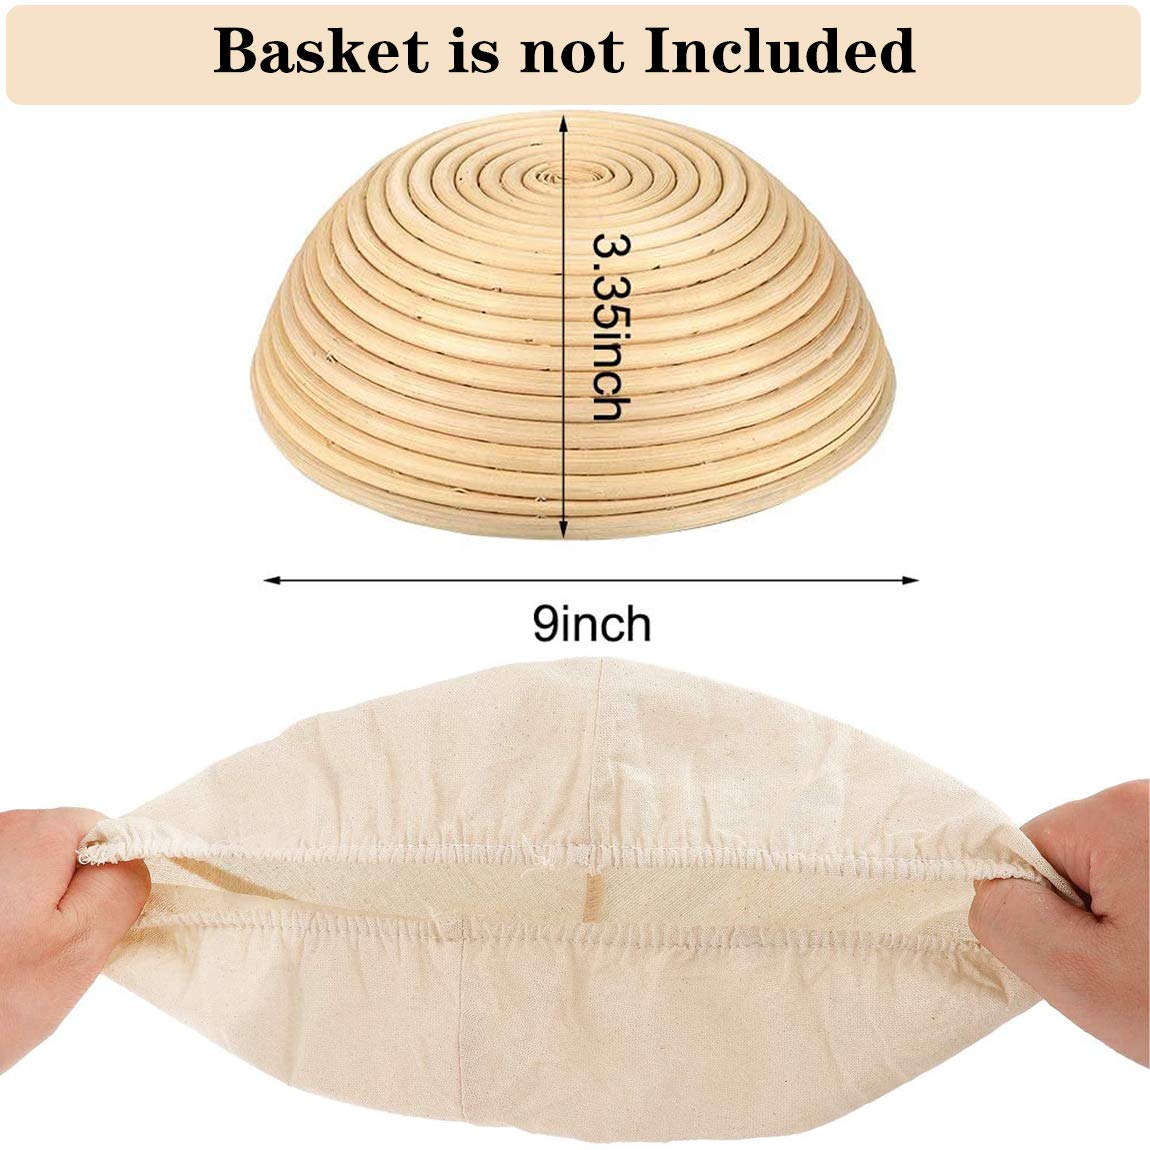 6 Pack 9" Round Bread Proofing Basket Cloth Liner, Natural Rattan Banneton Proofing Cloth for Professional & Home Baking Accessories Tools (6 PCS)